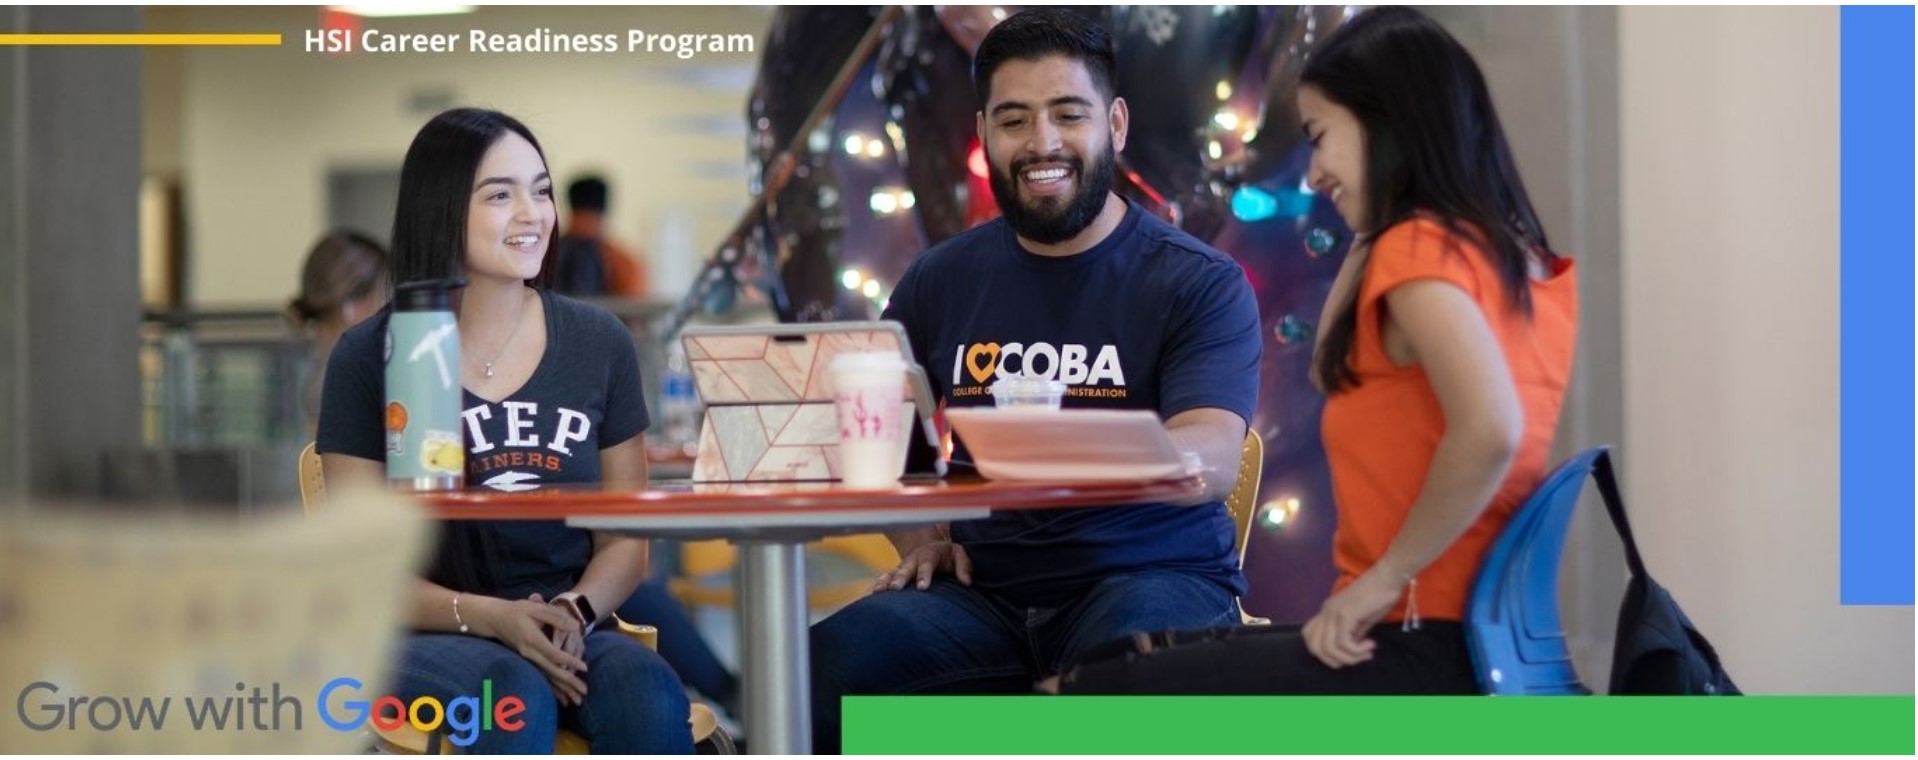 Grow with Google, an initiative that will help Hispanic students at more than 20 Hispanic-Serving Institutions (HSIs) prepare for the workforce, launched this week at The University of Texas at El Paso. 